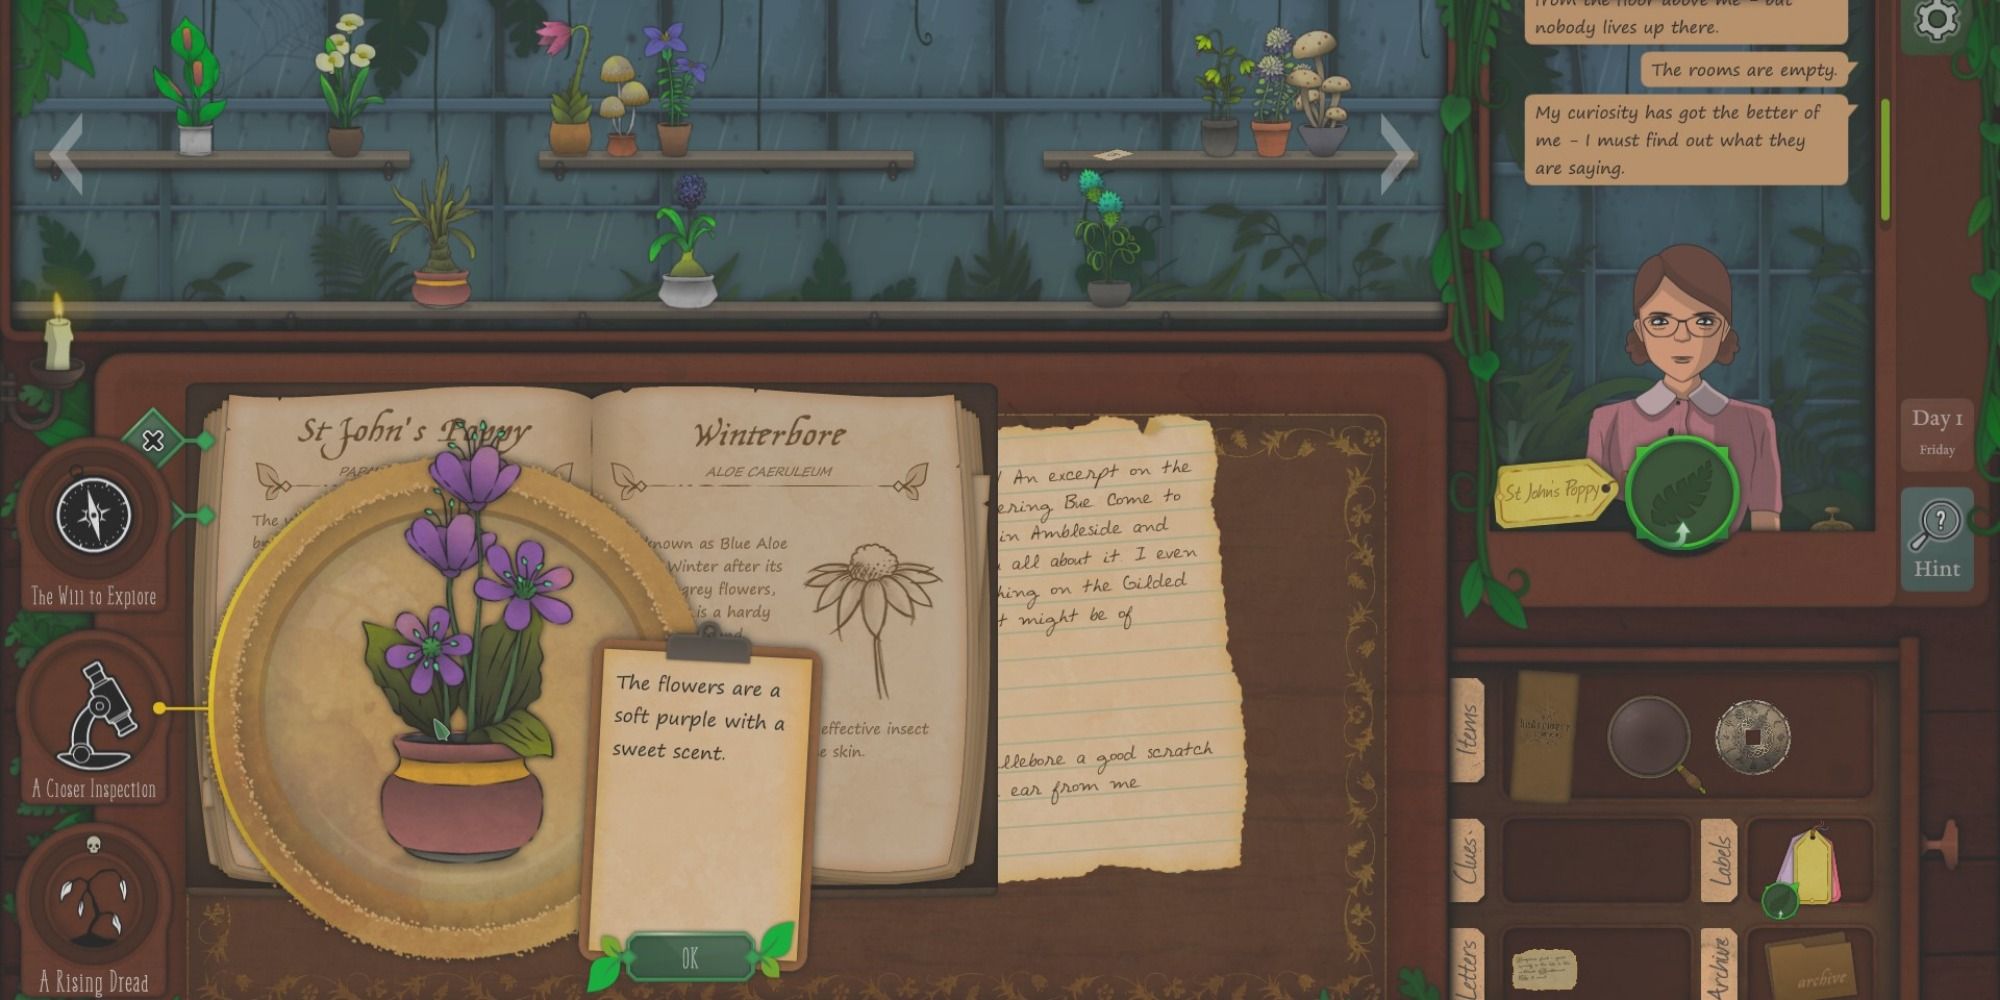 A purple plant is closely examined under a microscope on the shopkeeper's work station